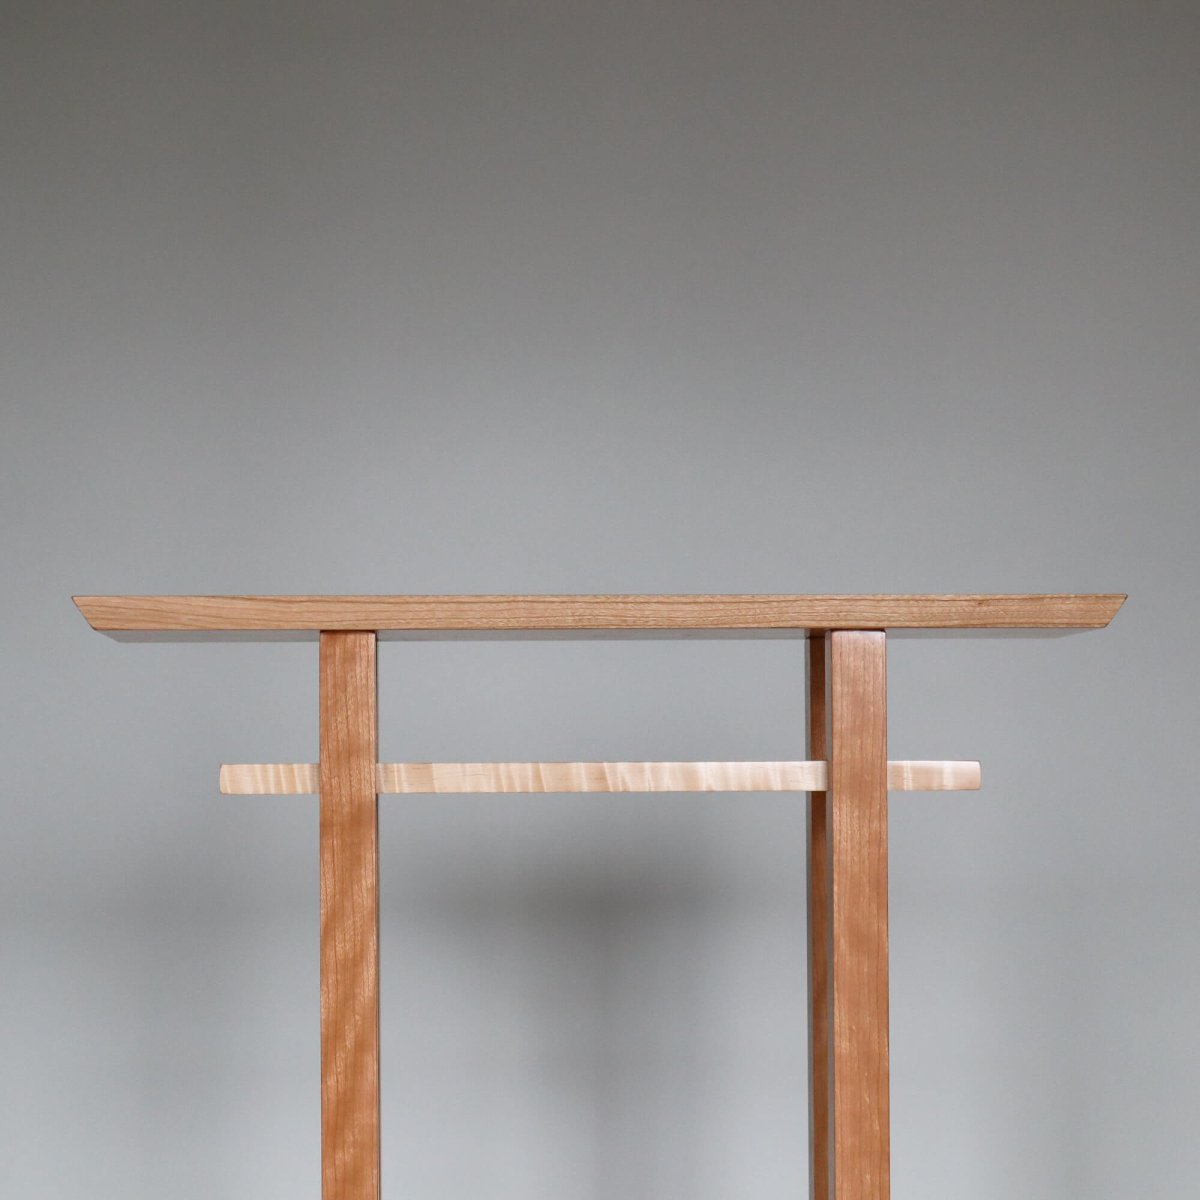 Japanese furniture design- side table small and narrow created from cherry and tiger maple wood- furniture for hallways by Mokuzai Furniture